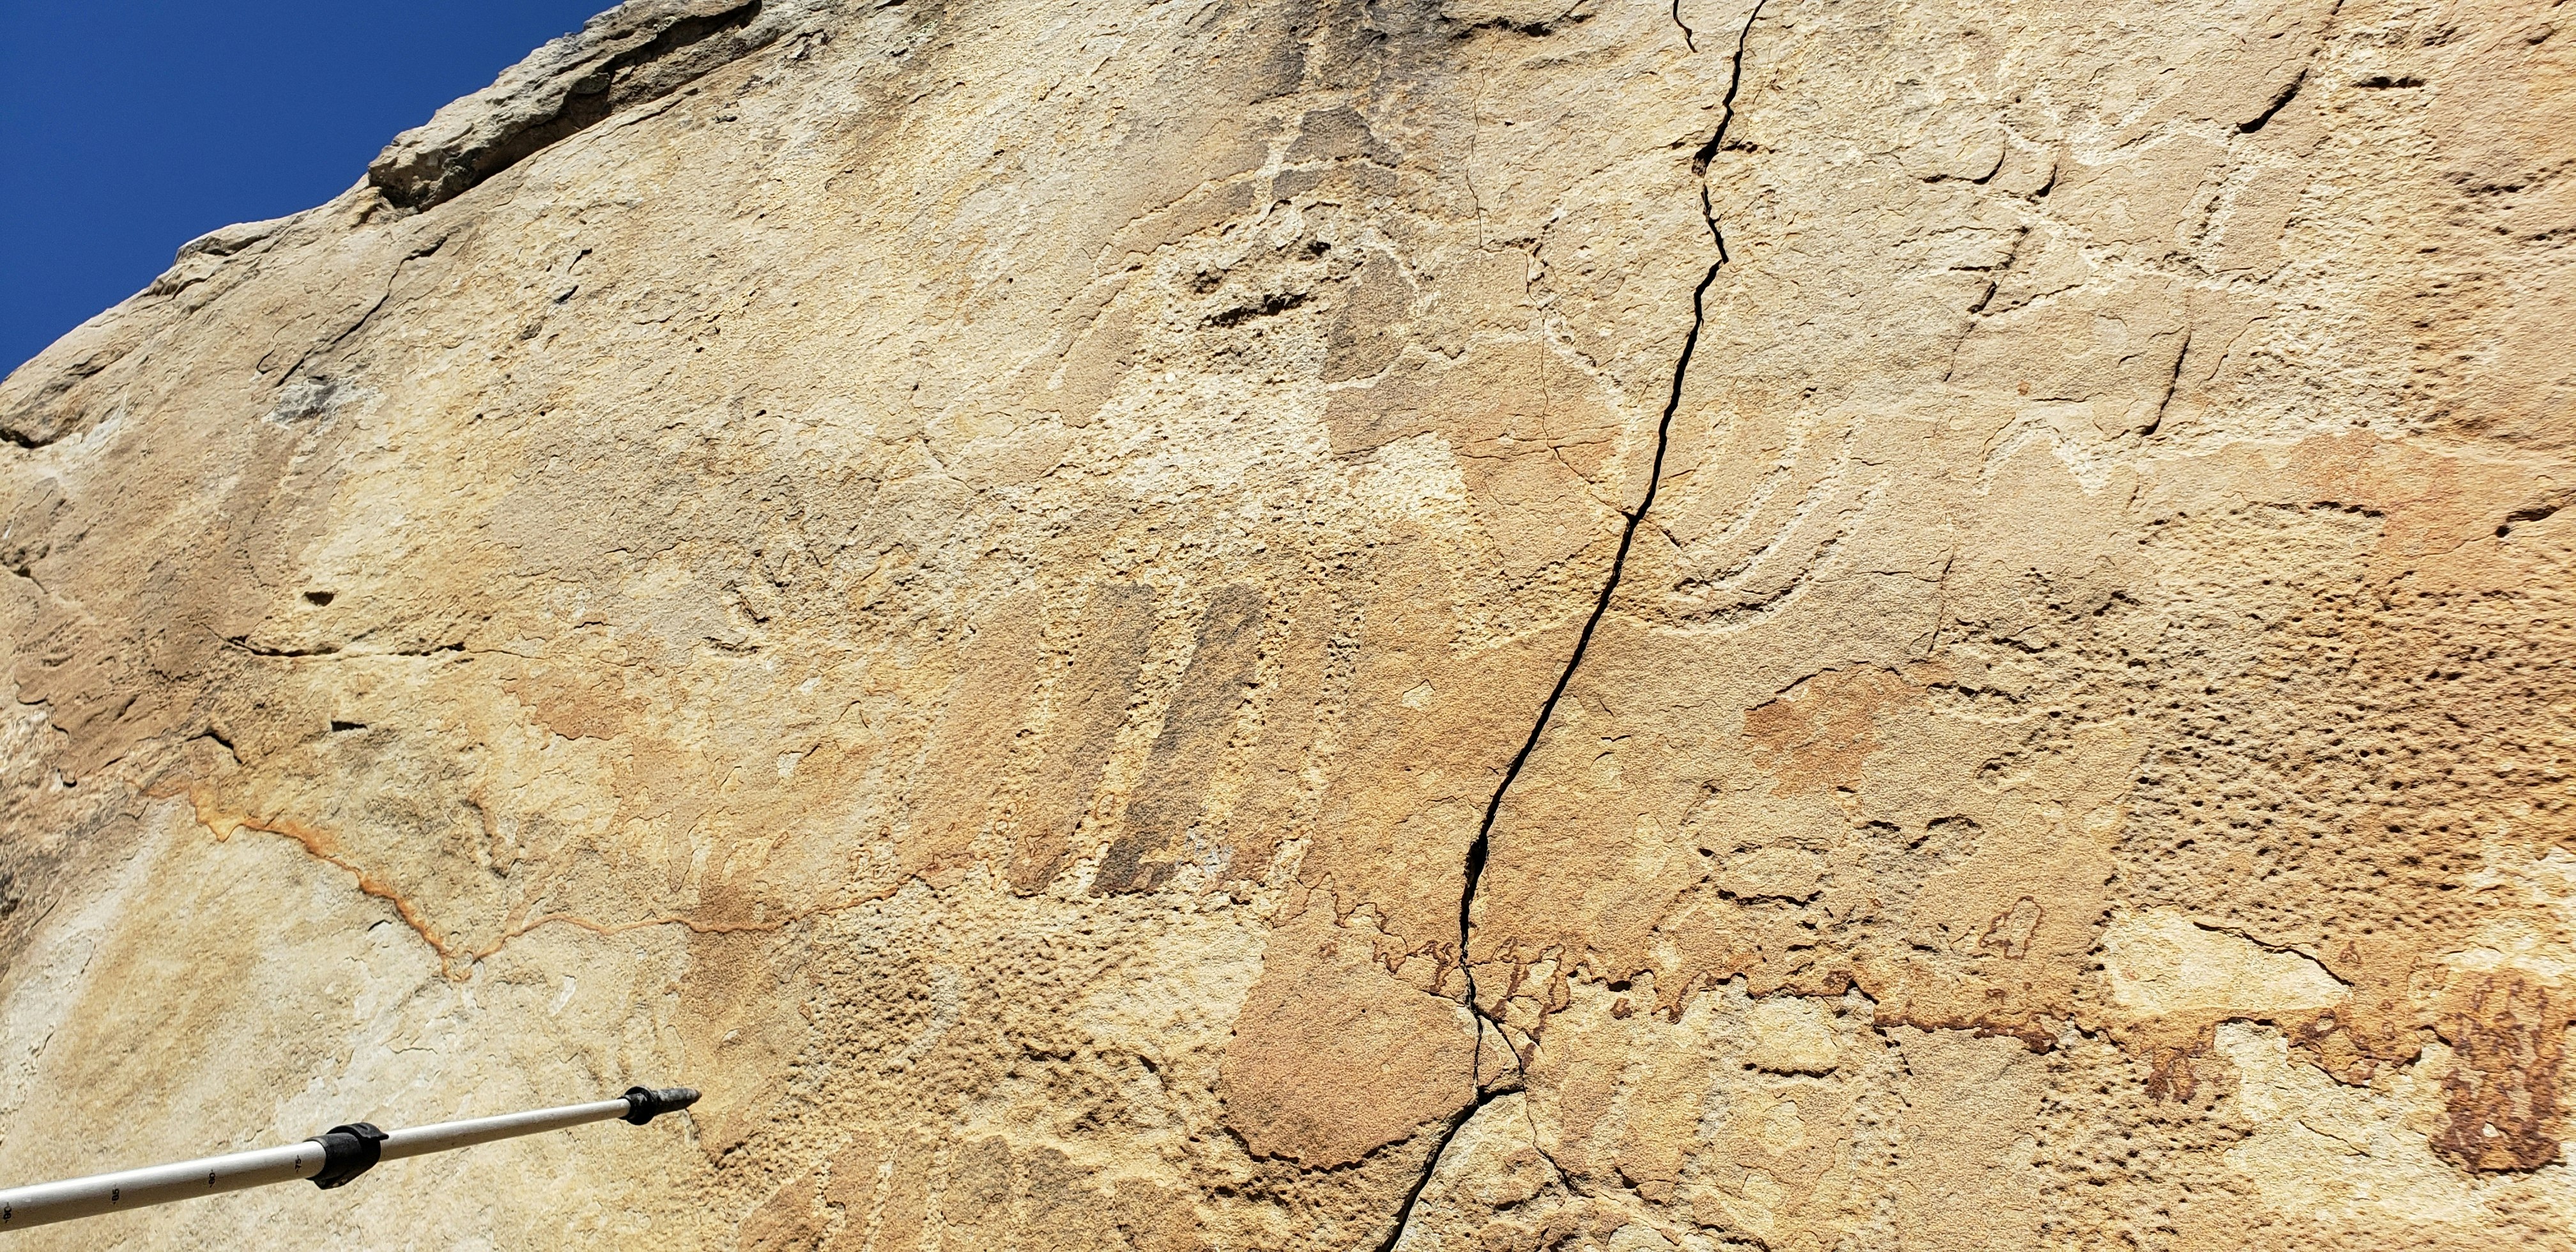 An anthropomorphic petroglyph found on the Wind River Indian Reservation. Time is wearing away the petroglyphs, and some of the rock faces have fallen away as well.